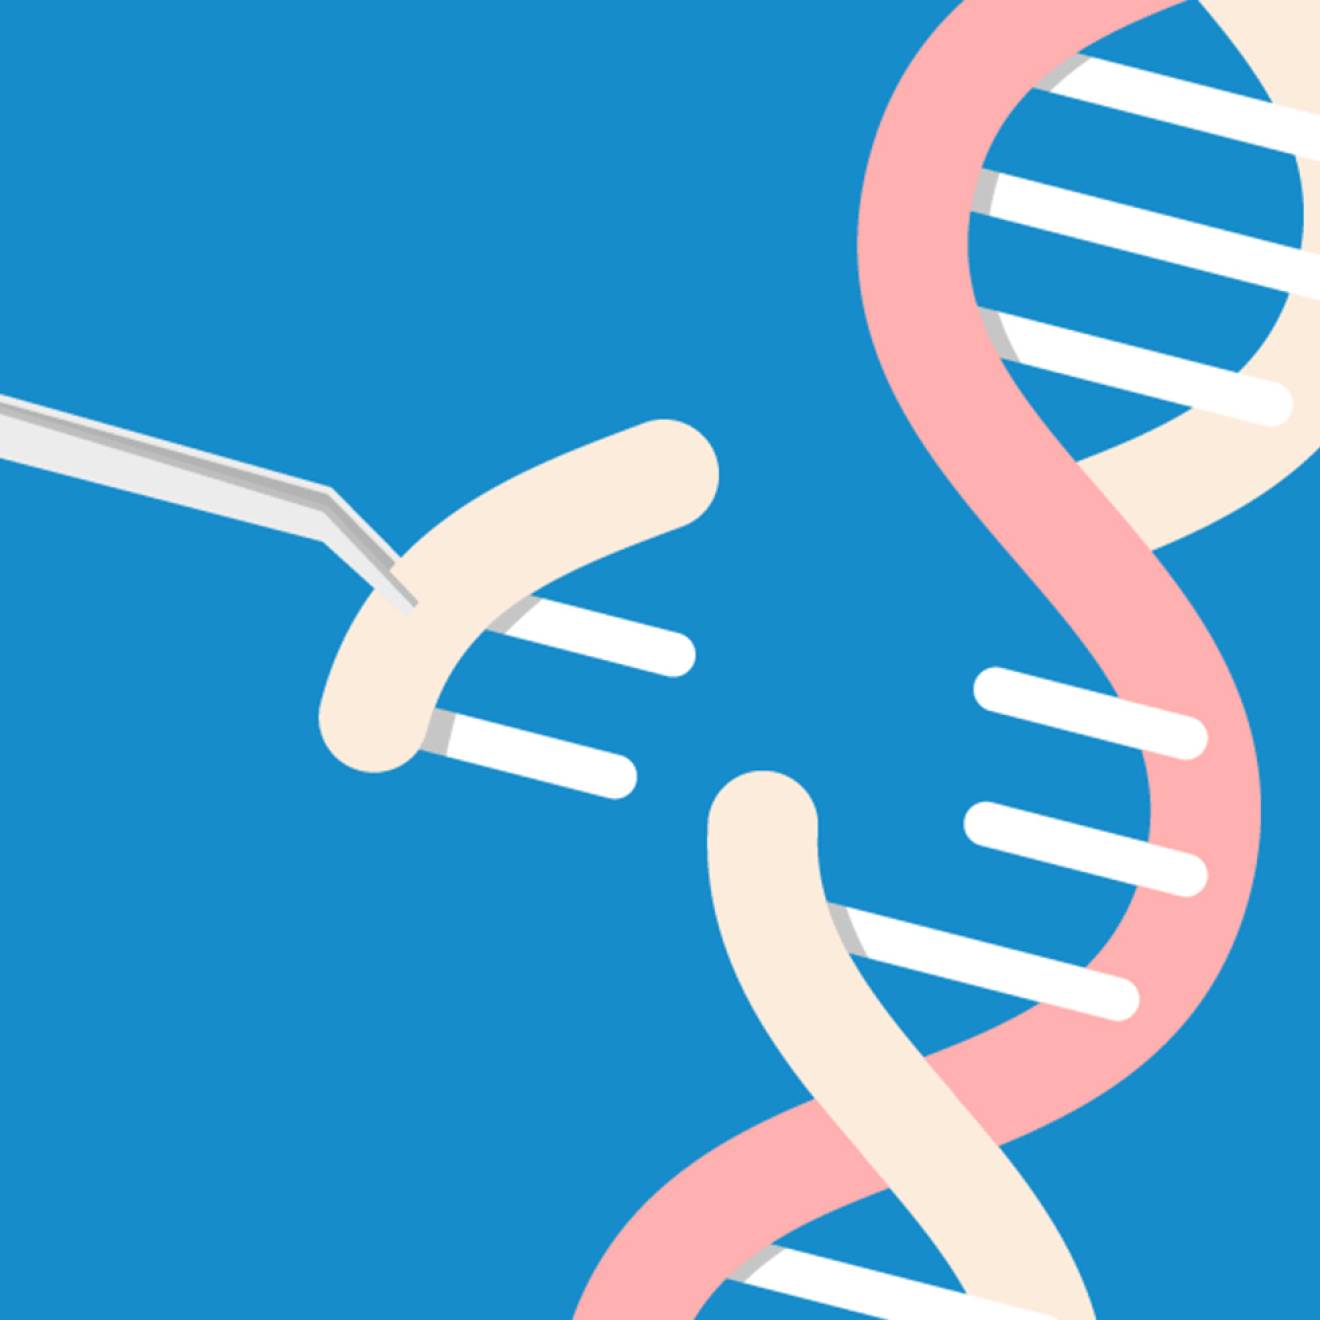 Illustration of a piece of DNA code being removed from a helix